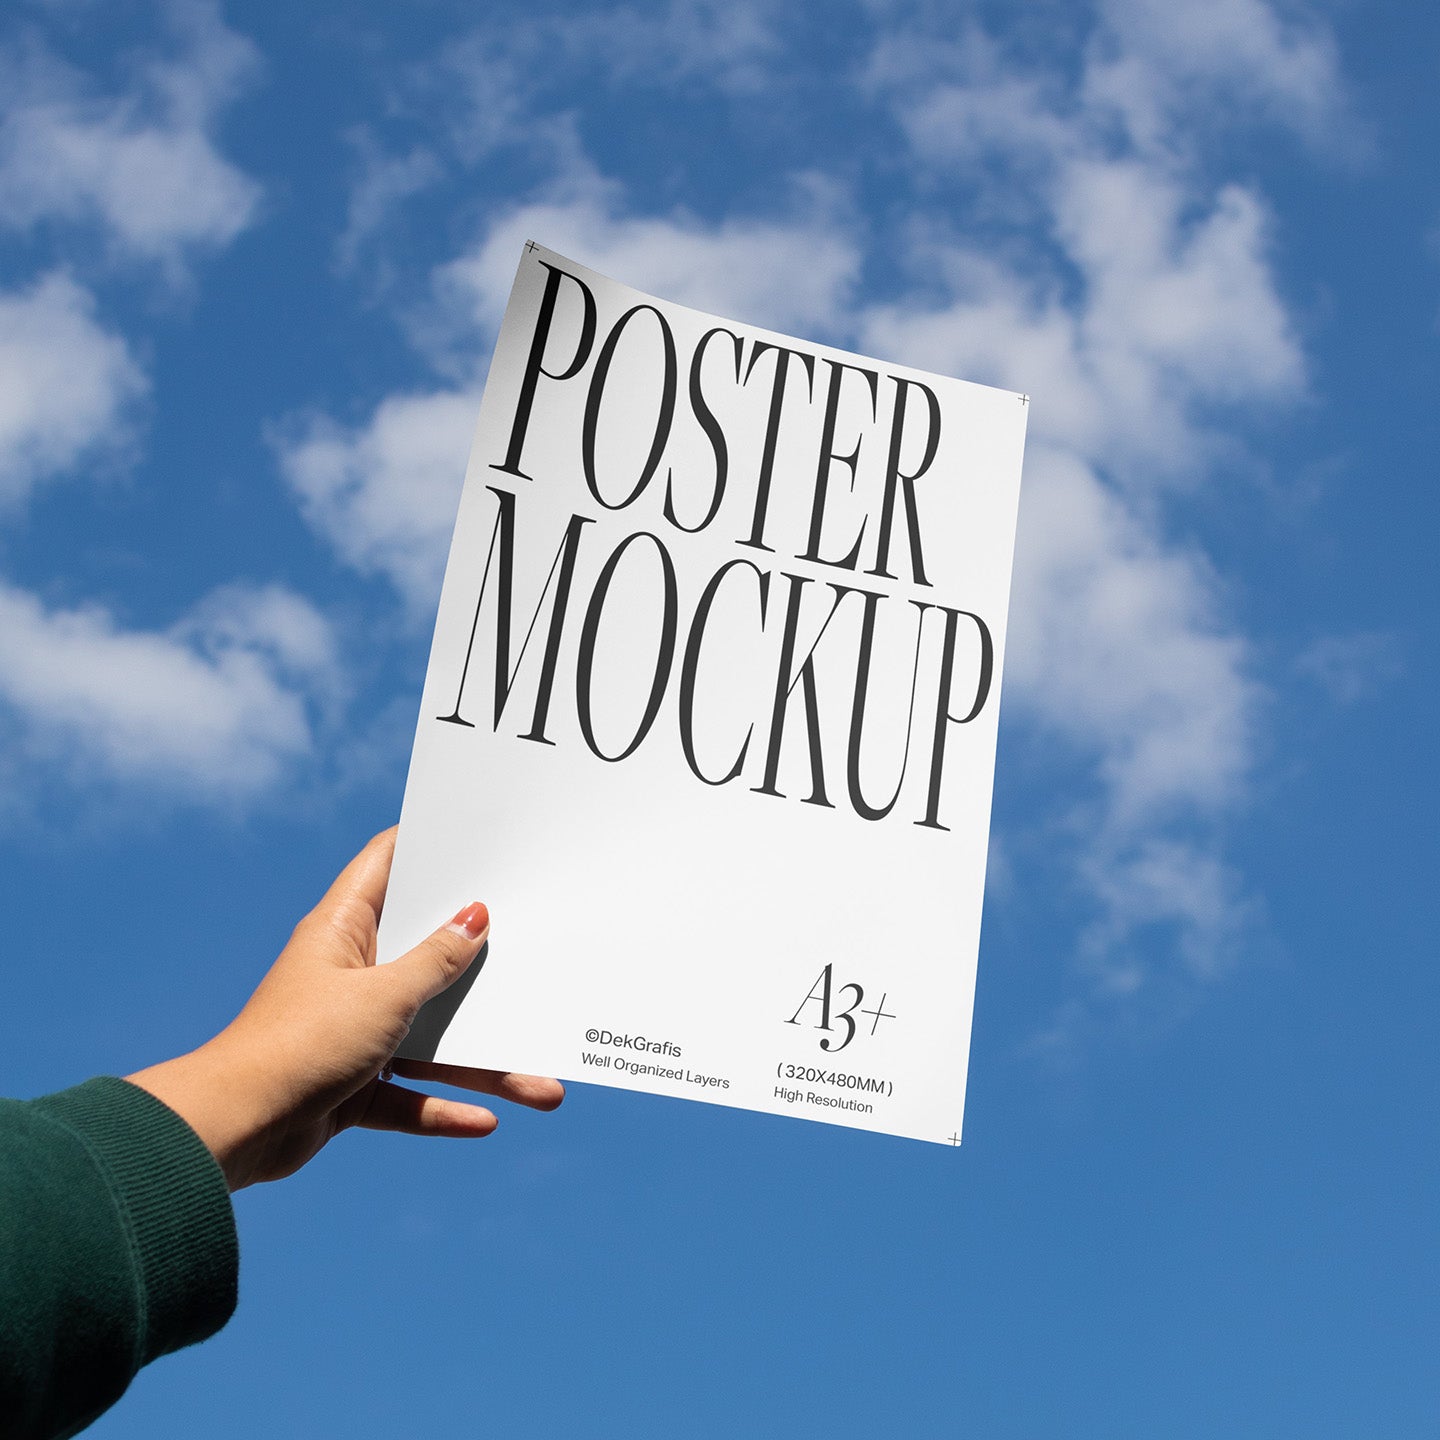 5 Outdoor A3+ Poster Mockups 2024